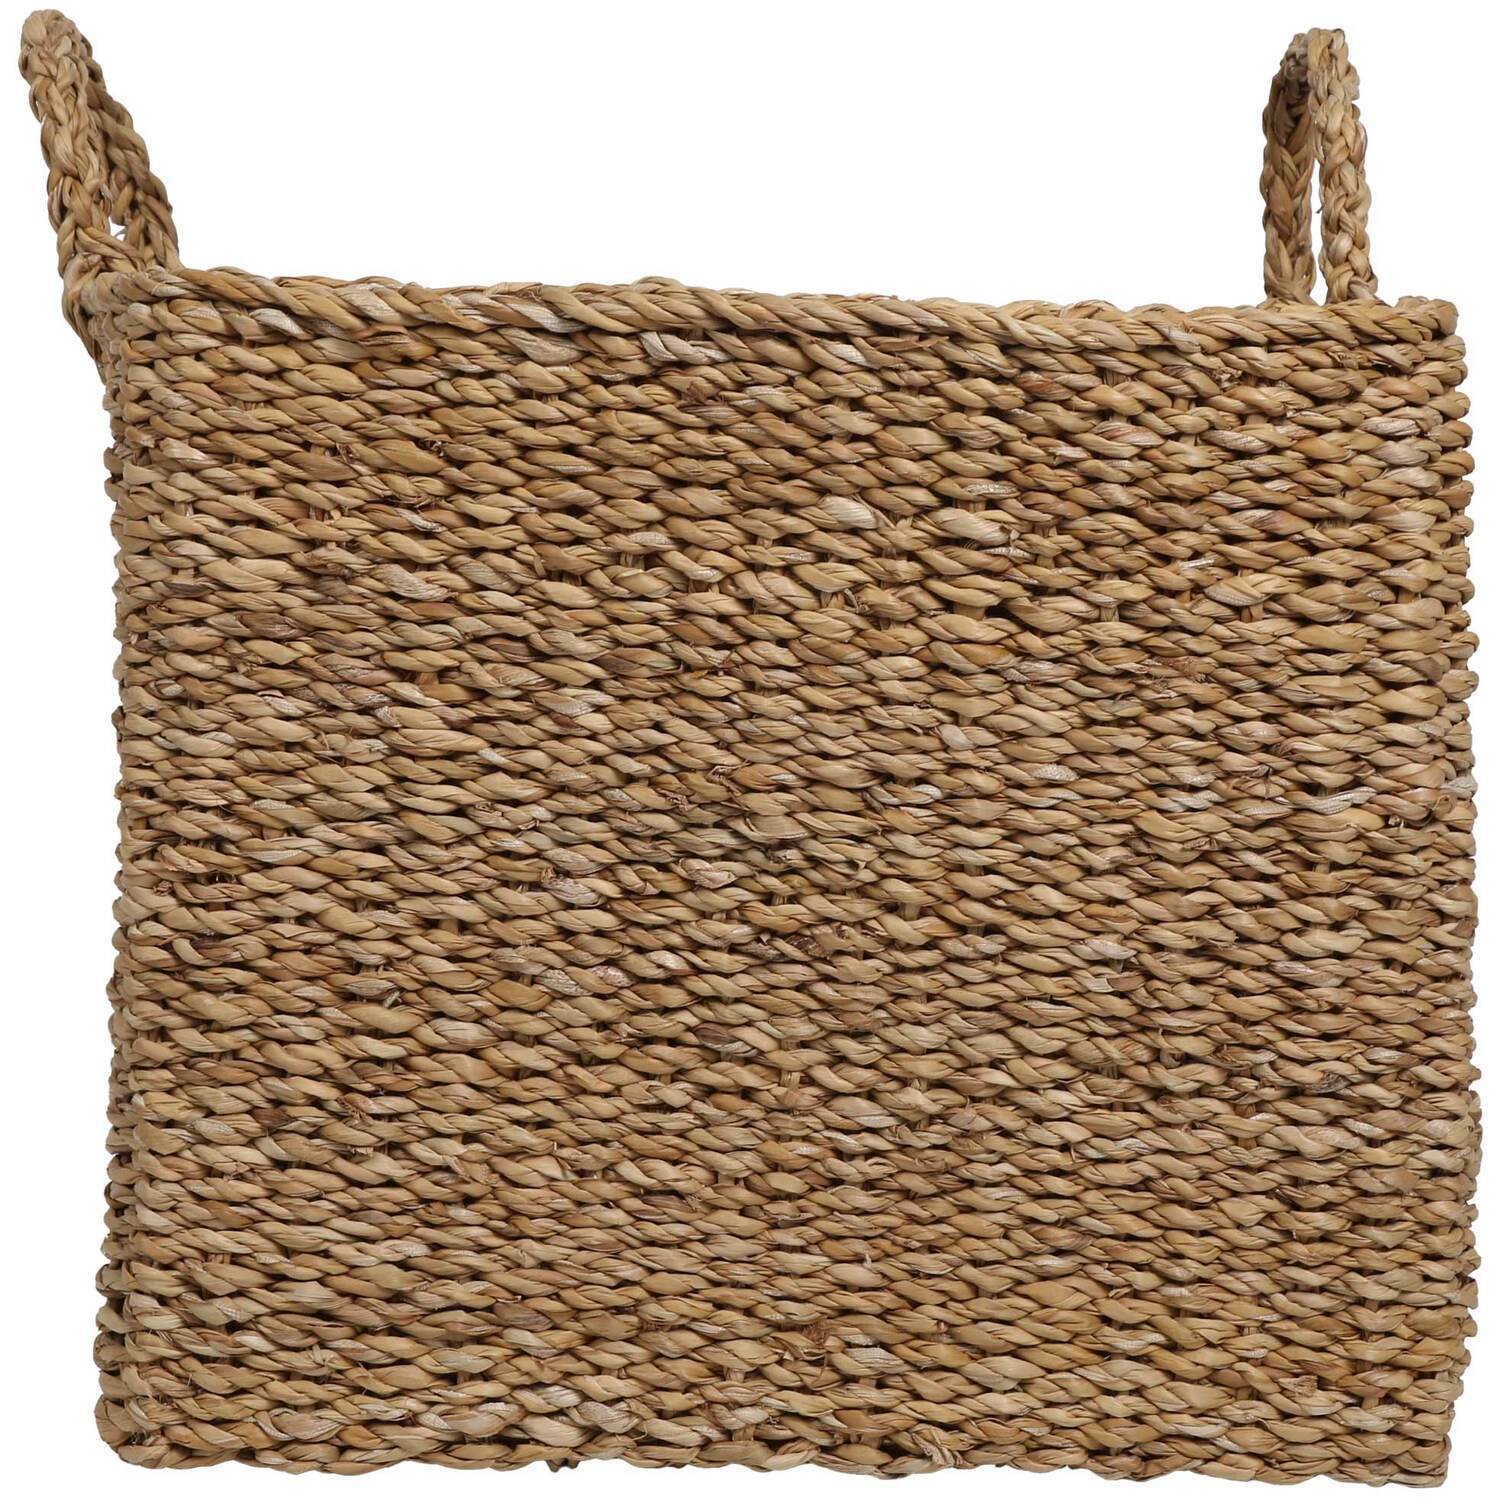 Brown Square Seagrass Basket 2 Pack Image 2